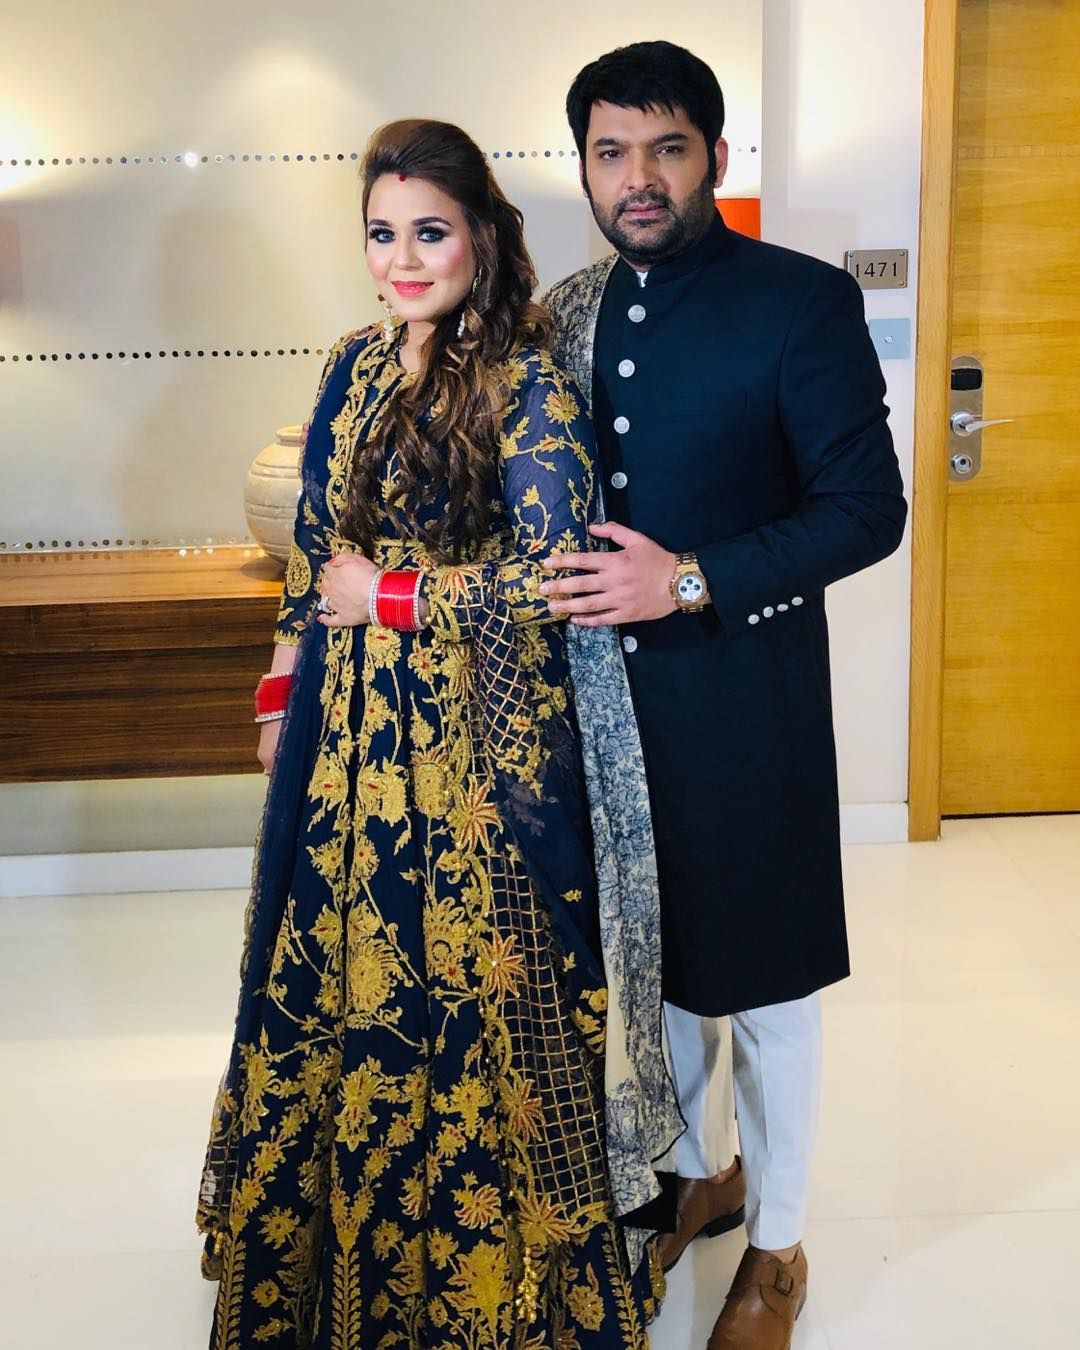 Kapil Sharma Reveals The Hilarious Reason Why He Ran Away From His And Ginni Chatrath’s Wedding